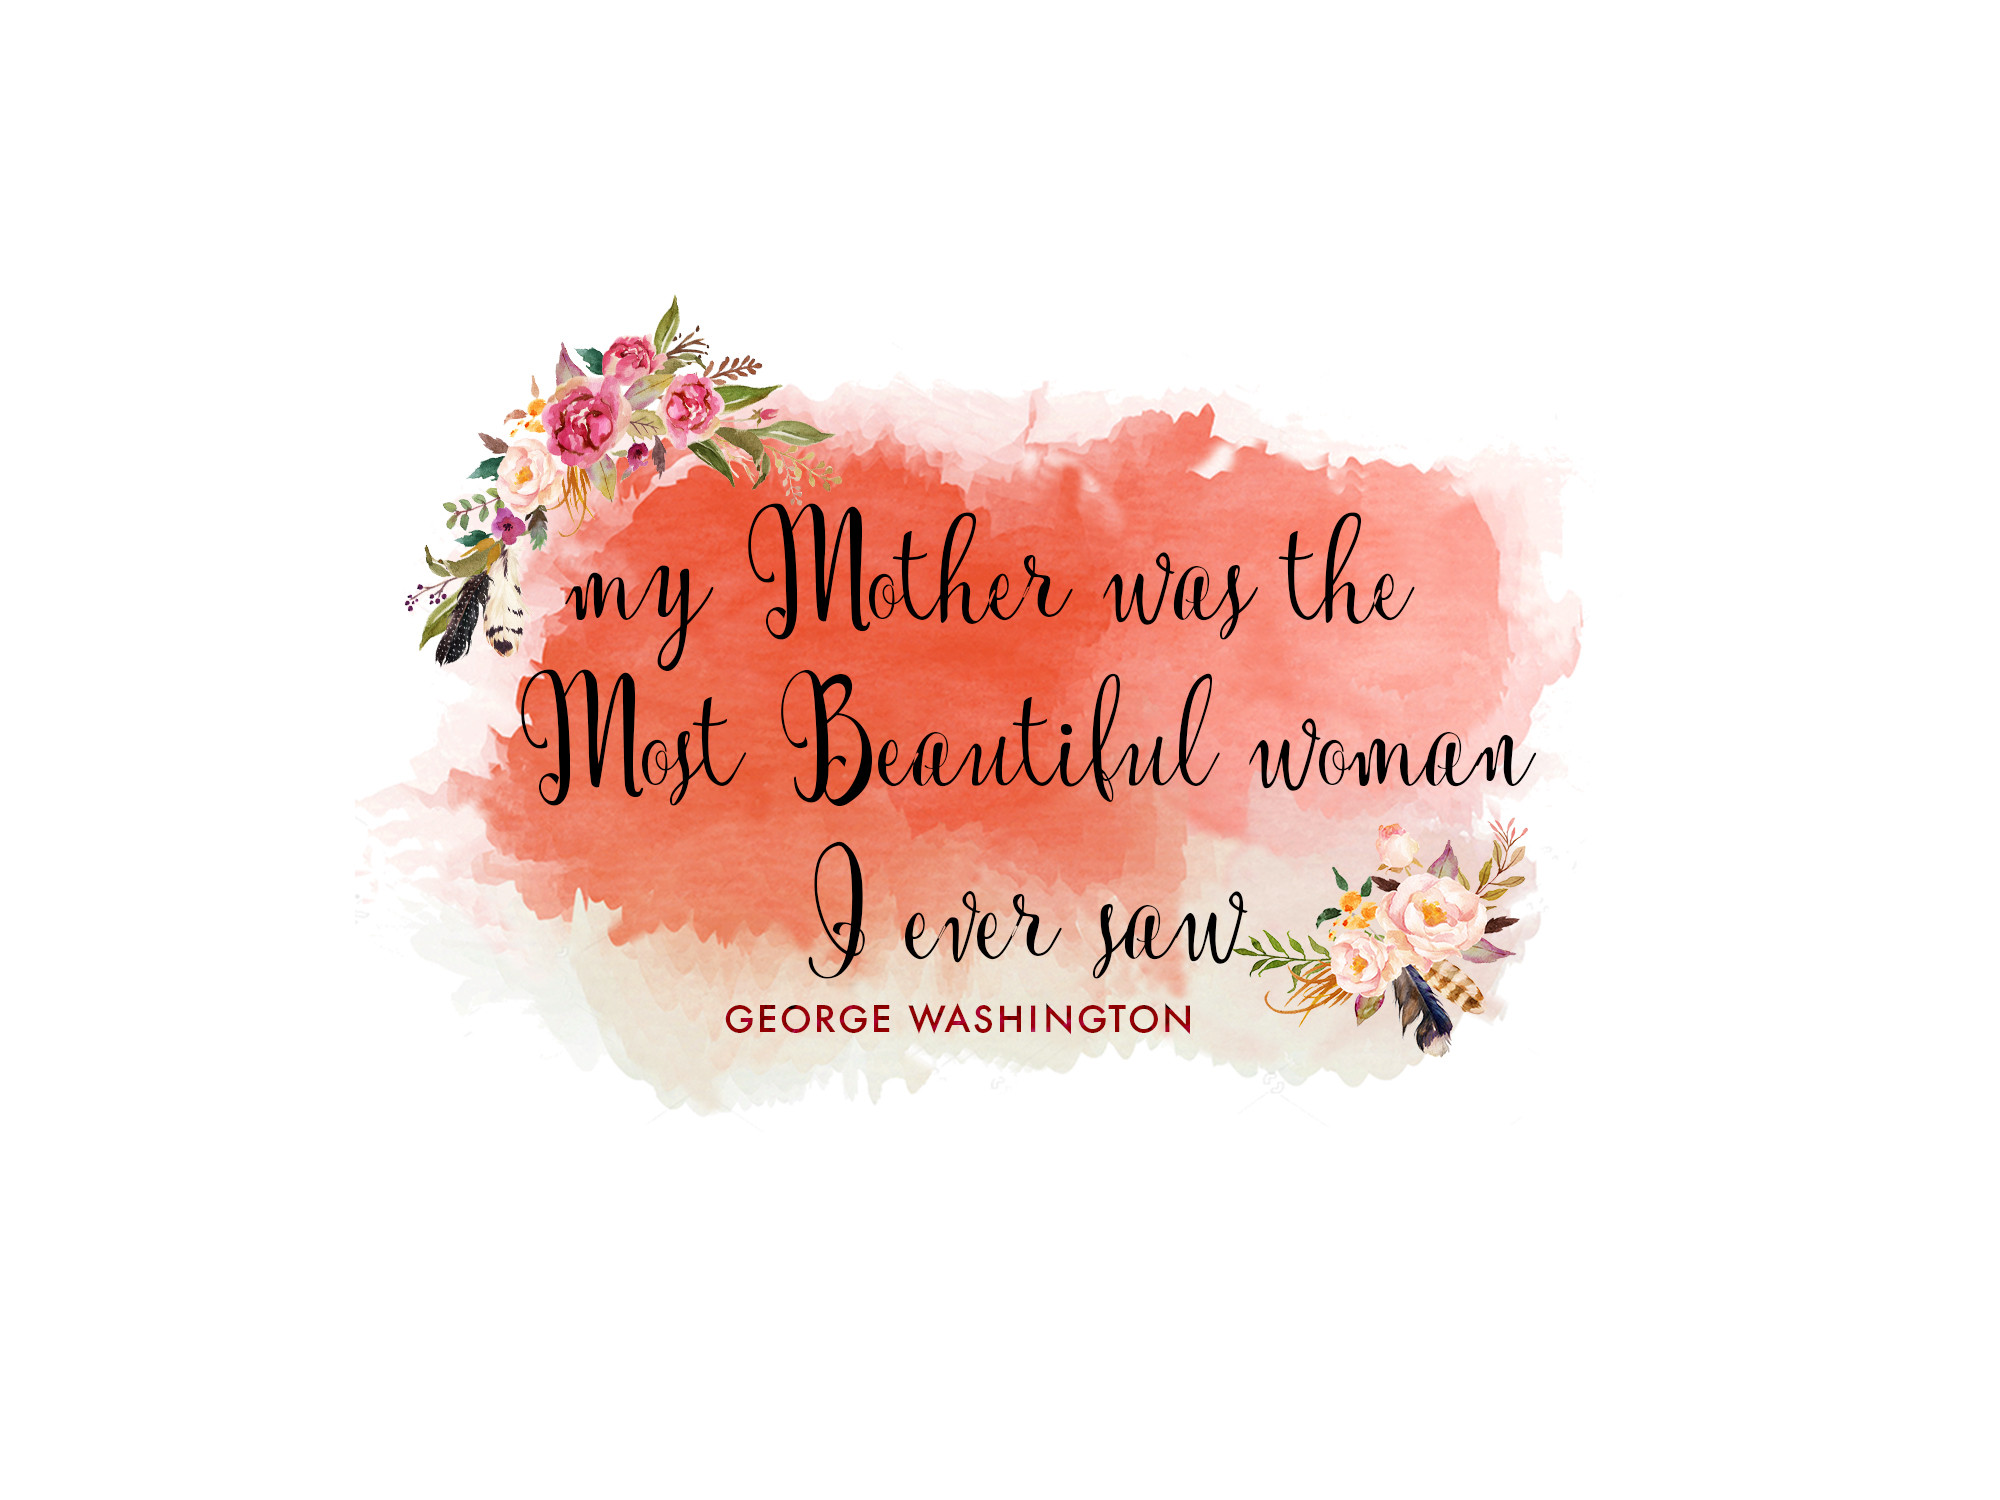 Mothers Day Pictures And Quotes
 Mother s Day Quotes Slogans Quotations & Sayings 2019